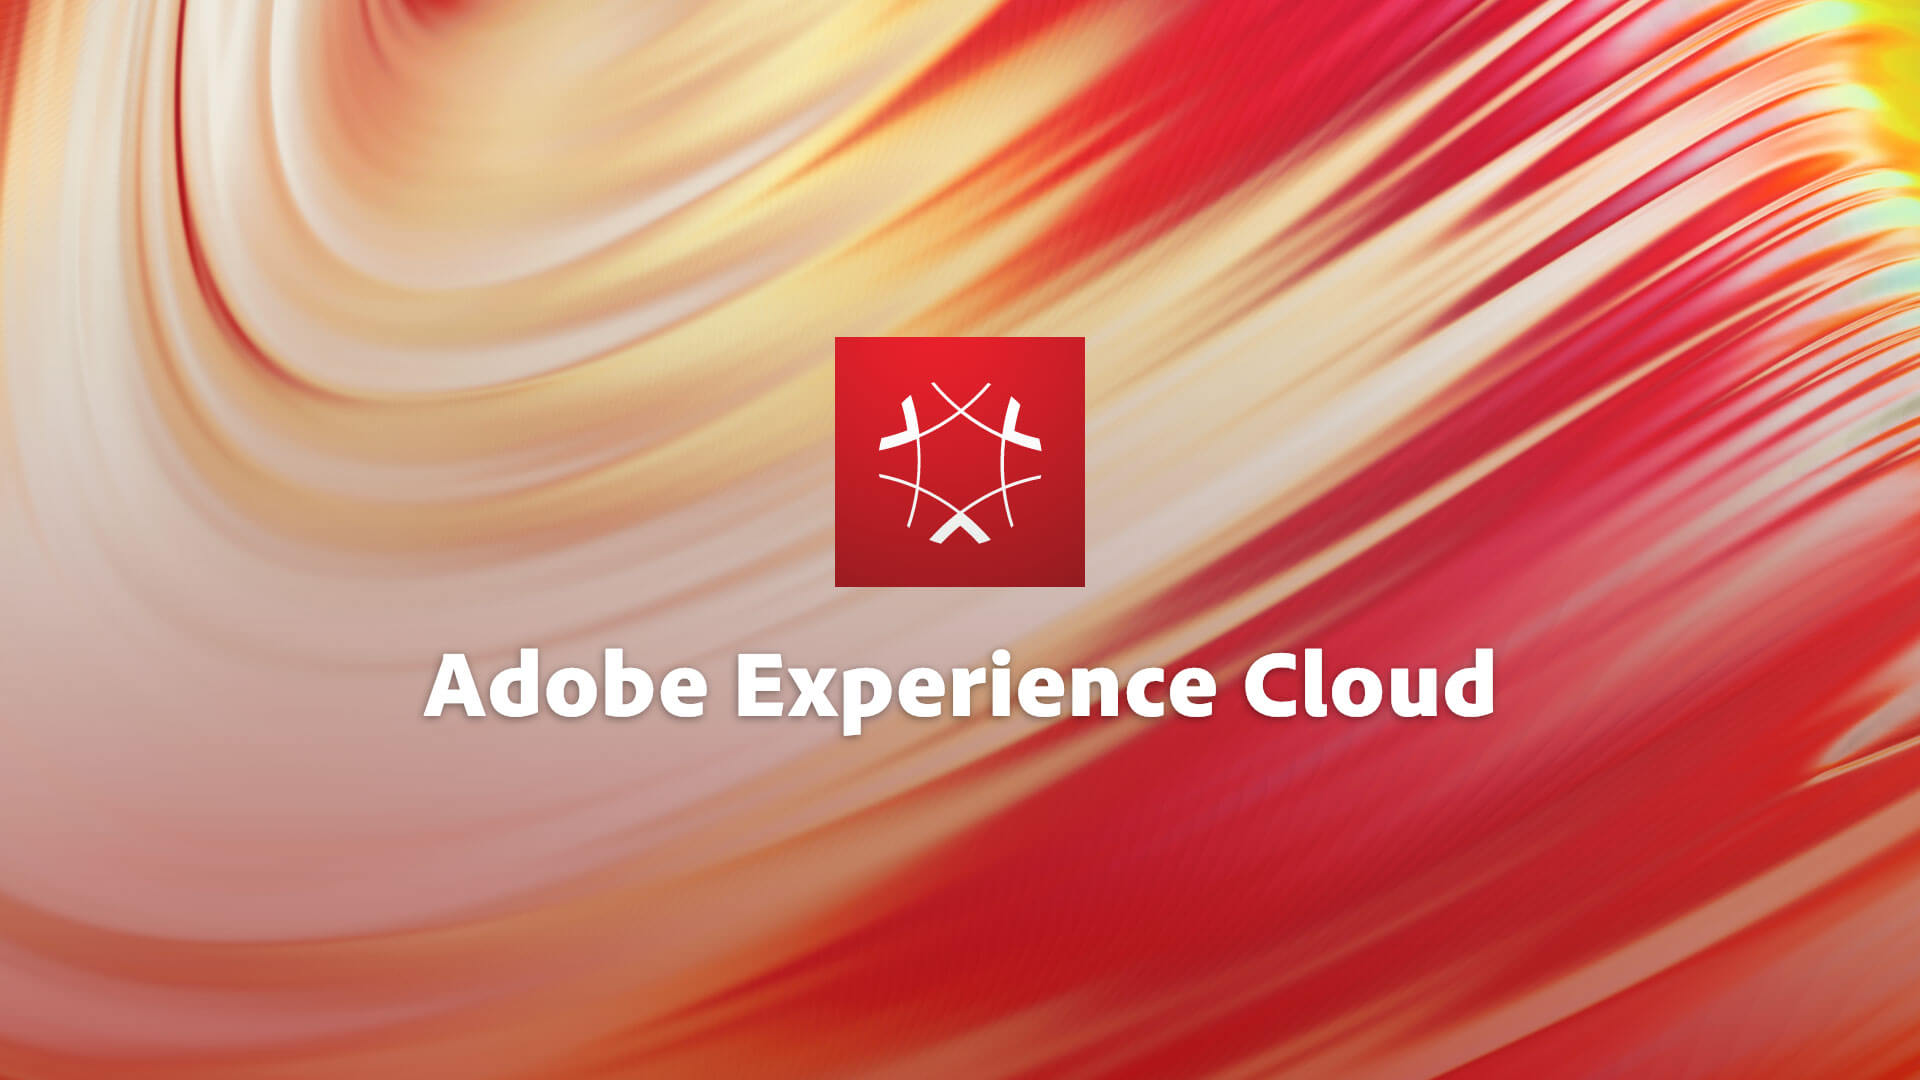 Why is Adobe so interested? How Experience Cloud is helping enterprises digitally transform